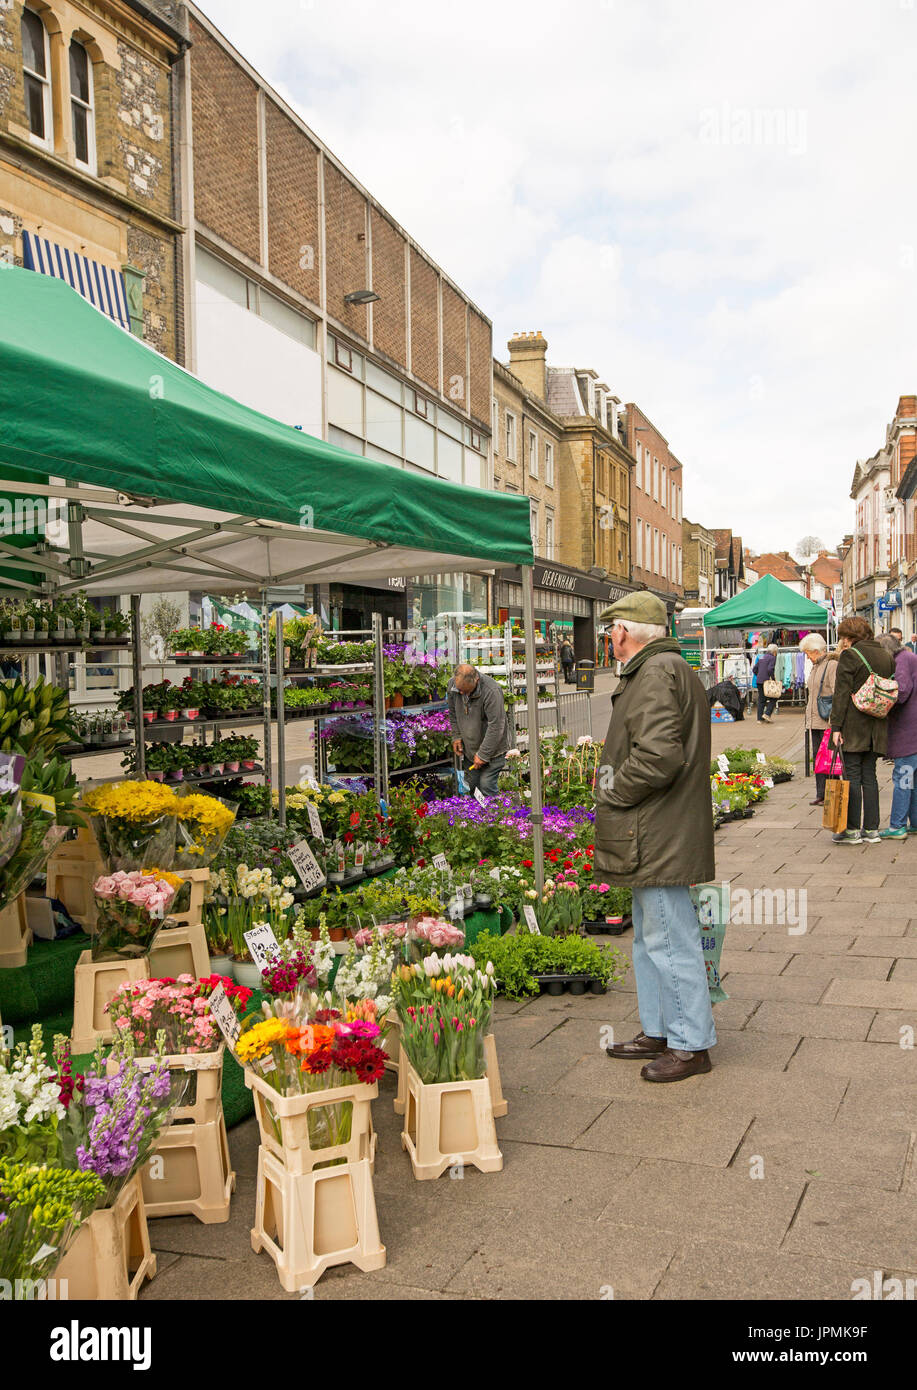 Flower stall with elderly man looking at colourful display of fresh flowers under green & white awning at street market in Winchester, England Stock Photo